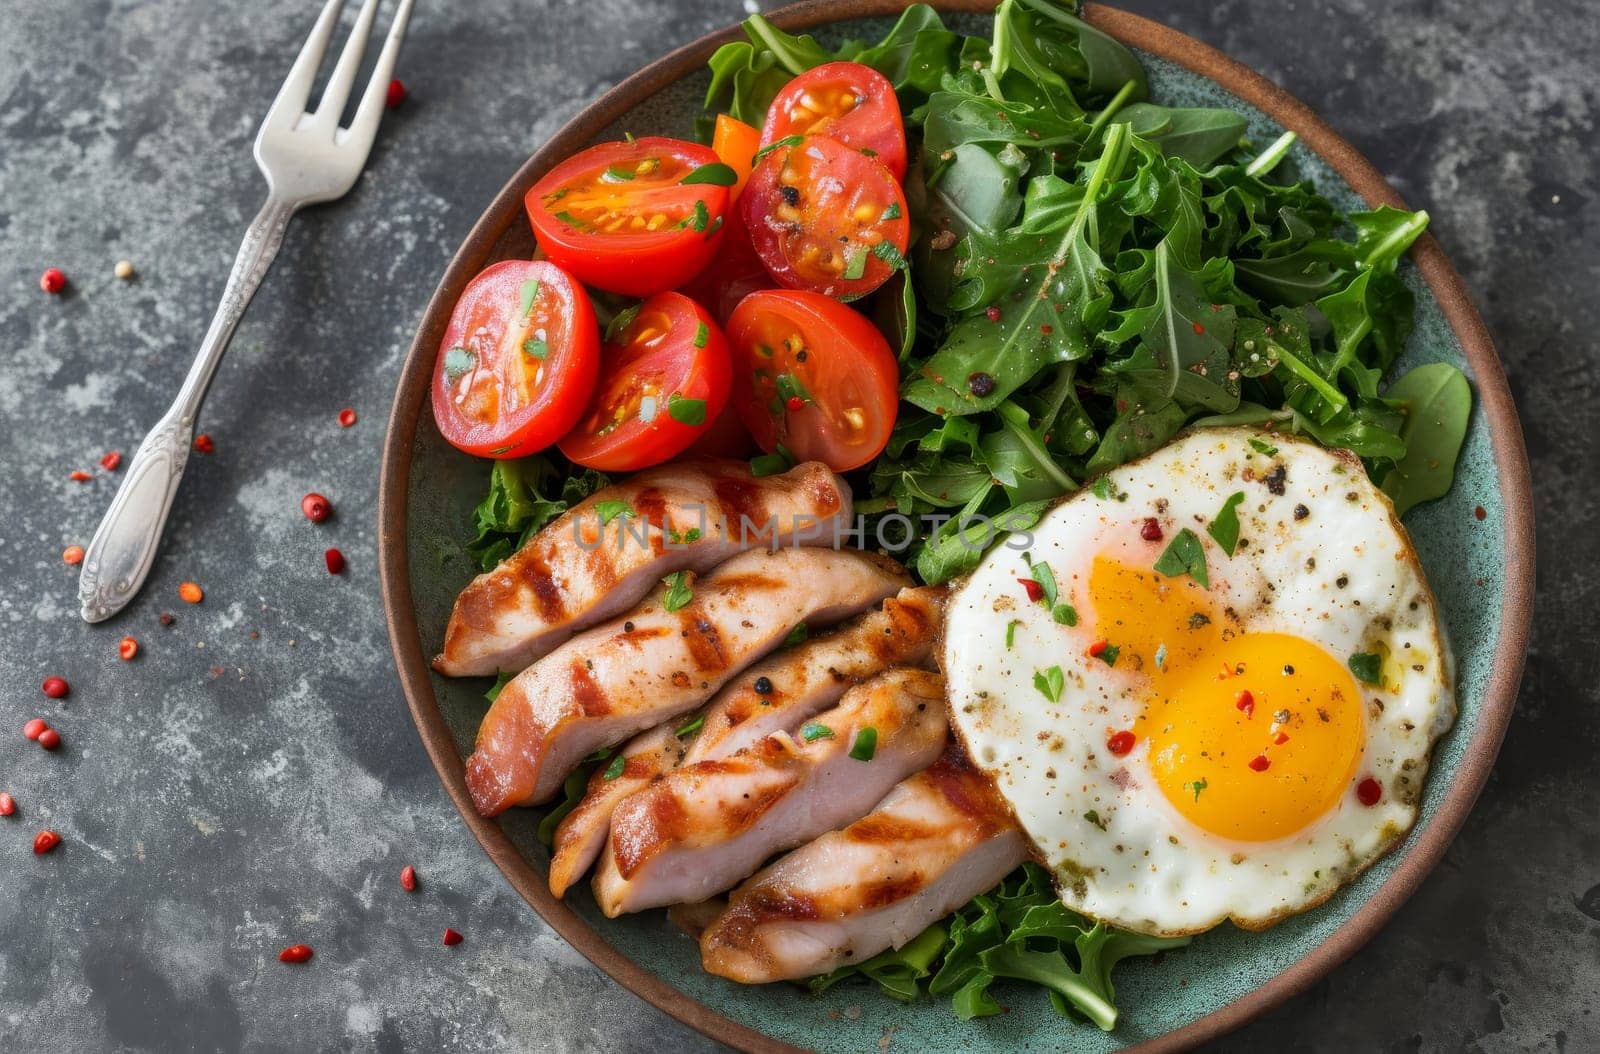 Grilled chicken strips paired with a sunny-side-up egg, fresh cherry tomatoes, and arugula, seasoned with herbs and spices, present a healthy and appetizing meal